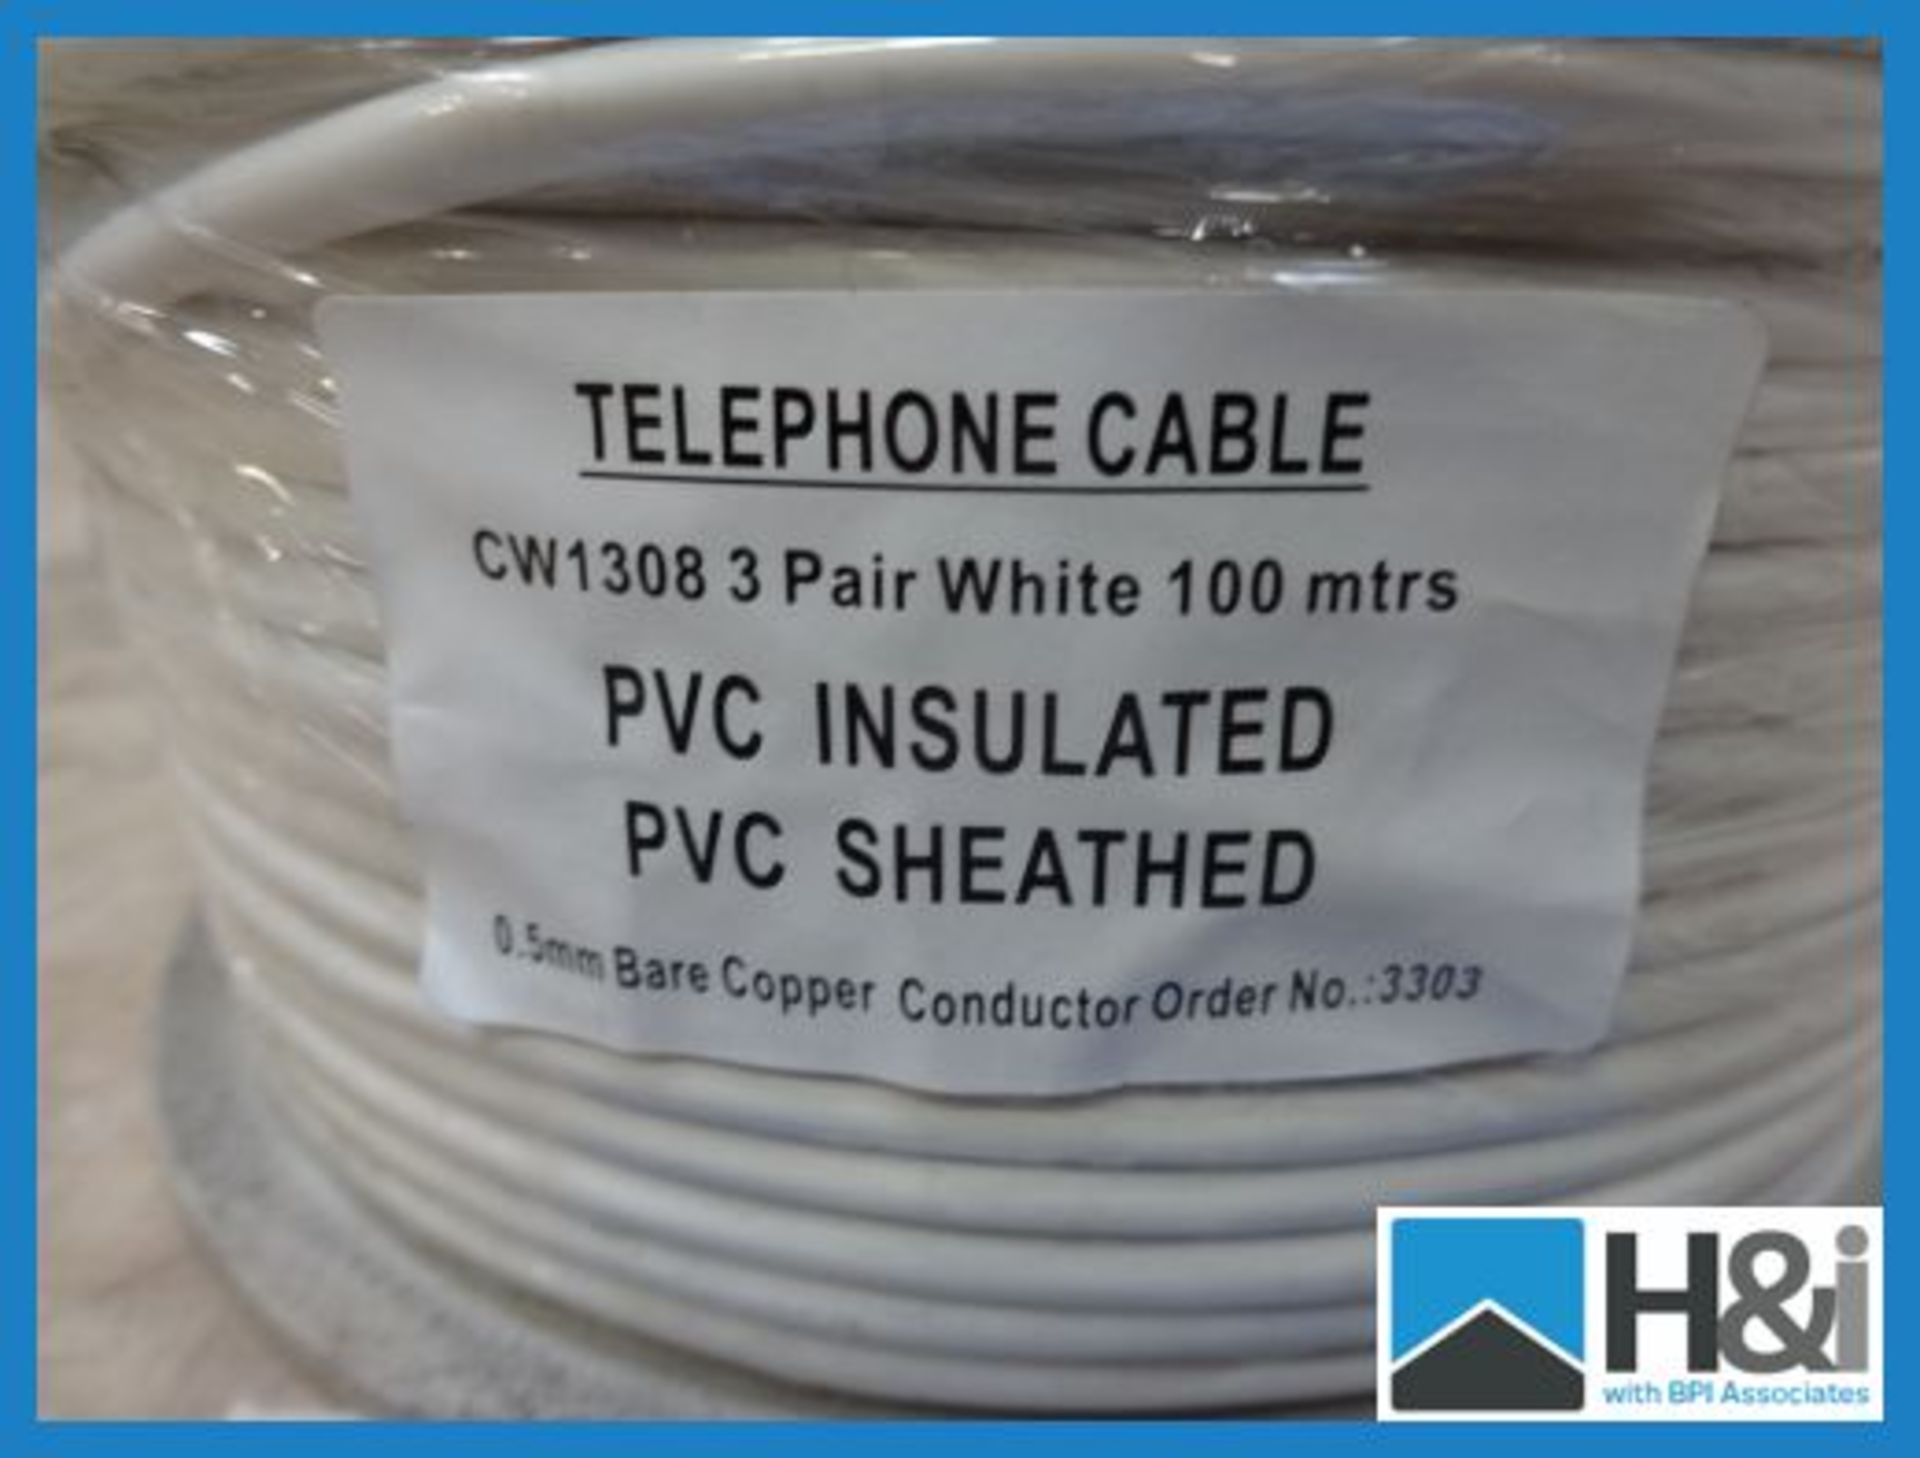 2 x 100m Multicore internal telephone cable manufactured to BT specification CW1308. 3 Pair White - Image 2 of 2